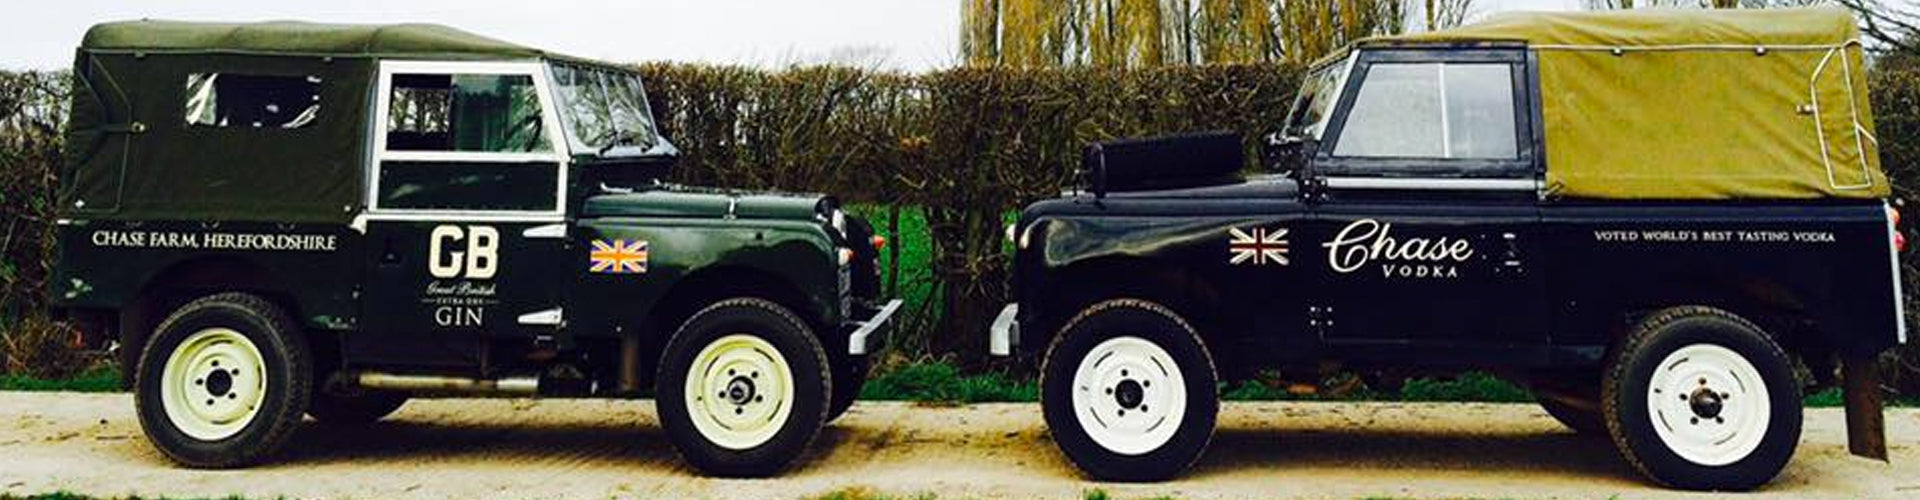 Land Rover Defenders in Chase Distillery Gin & Vodka Livery